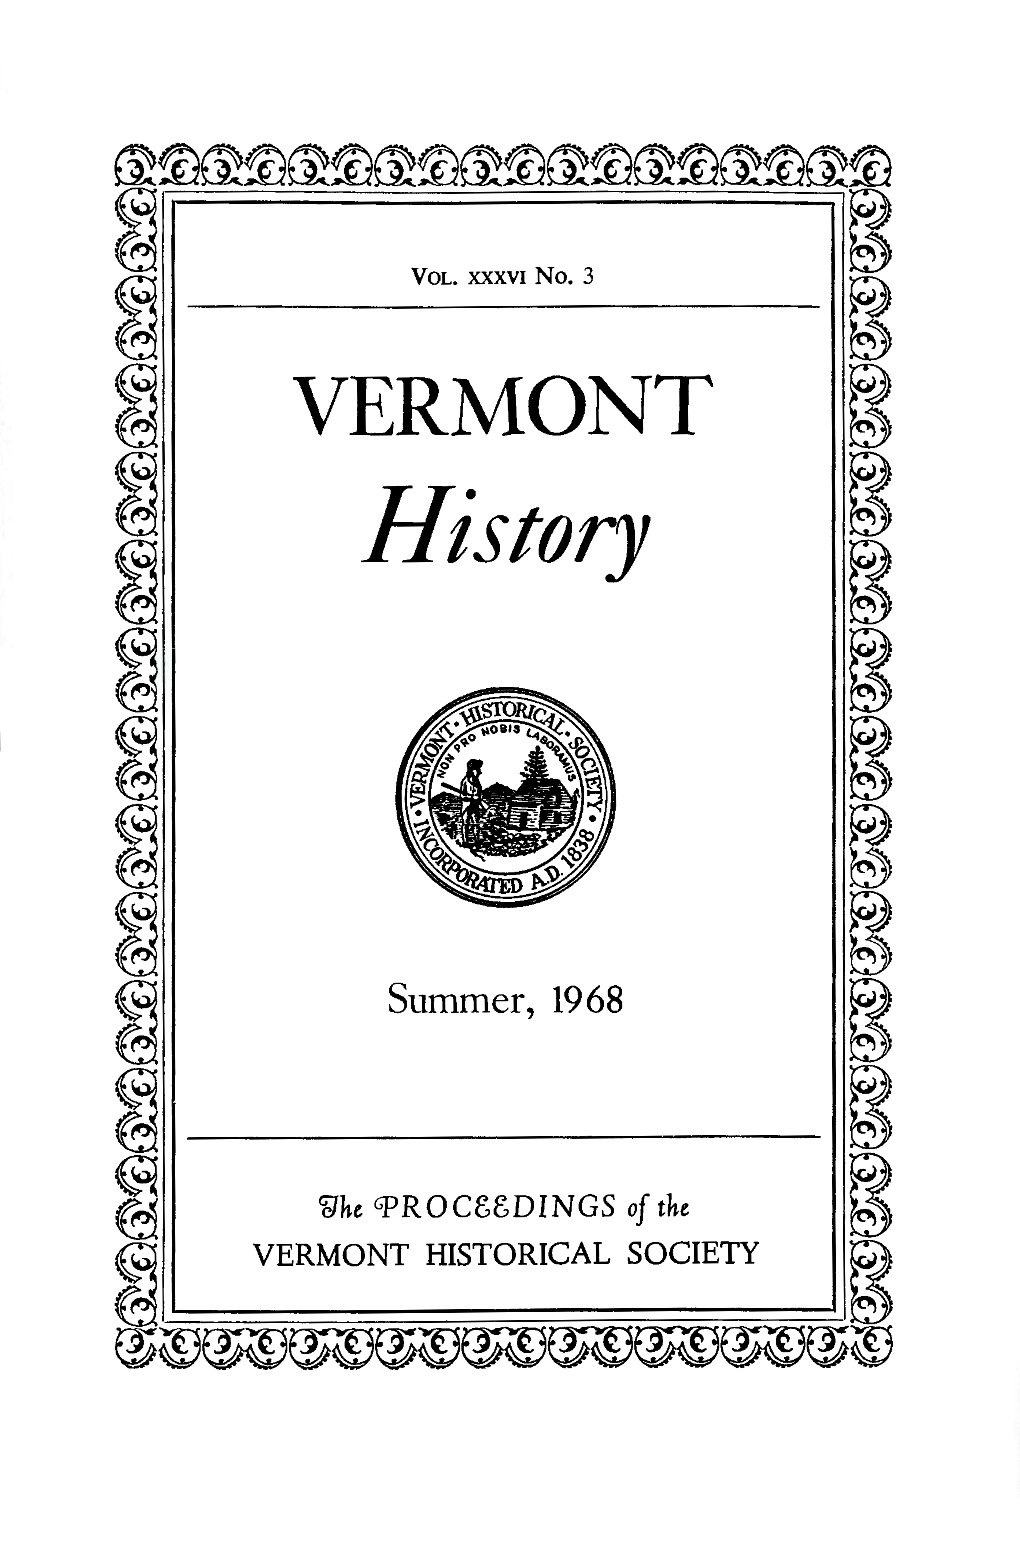 History ~ ~ ~ ~ ~ ~ ~ ~ ~ ~ ~ ~ Summer, 1968 ~ ~ ~ @ @ ~ ~He Gf>ROCSSDINGS of the ~ ~ VERMONT HISTORICAL SOCIETY ~